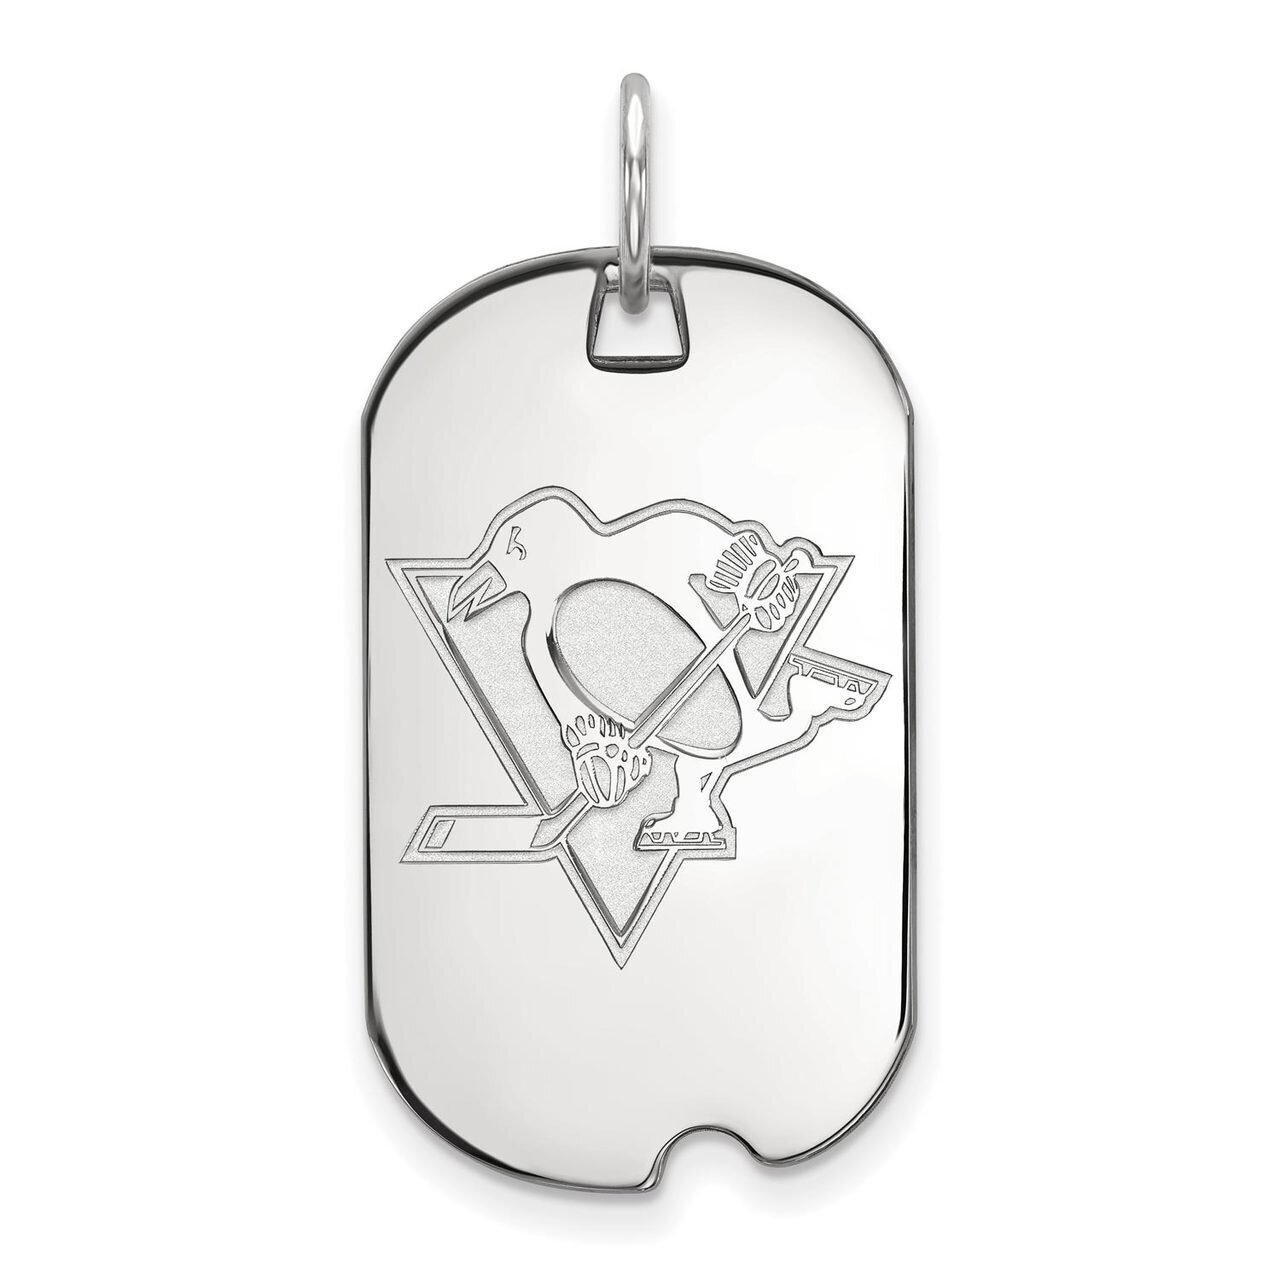 Pittsburh Penguins Small Dog Tag 10k White Gold 1W024PEN